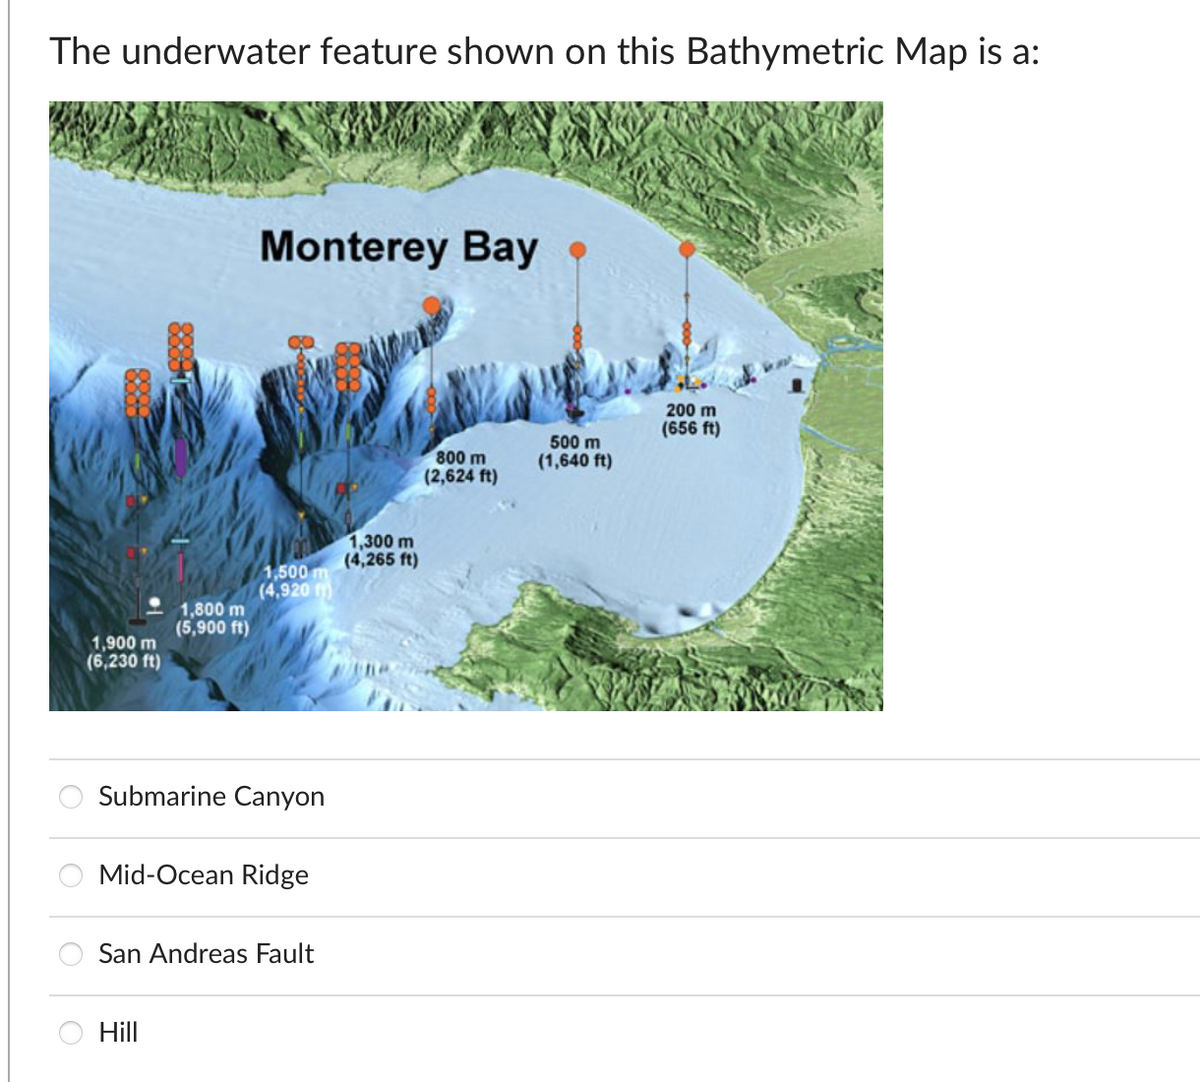 The underwater feature shown on this Bathymetric Map is a:
1,900 m
(6,230 ft)
Monterey Bay
1,300 m
(4,265 ft)
1,500 m
1,800 m
(4,920 ft)
(5,900 ft)
Submarine Canyon
Mid-Ocean Ridge
San Andreas Fault
Hill
200 m
(656 ft)
800 m
(2,624 ft)
500 m
(1,640 ft)